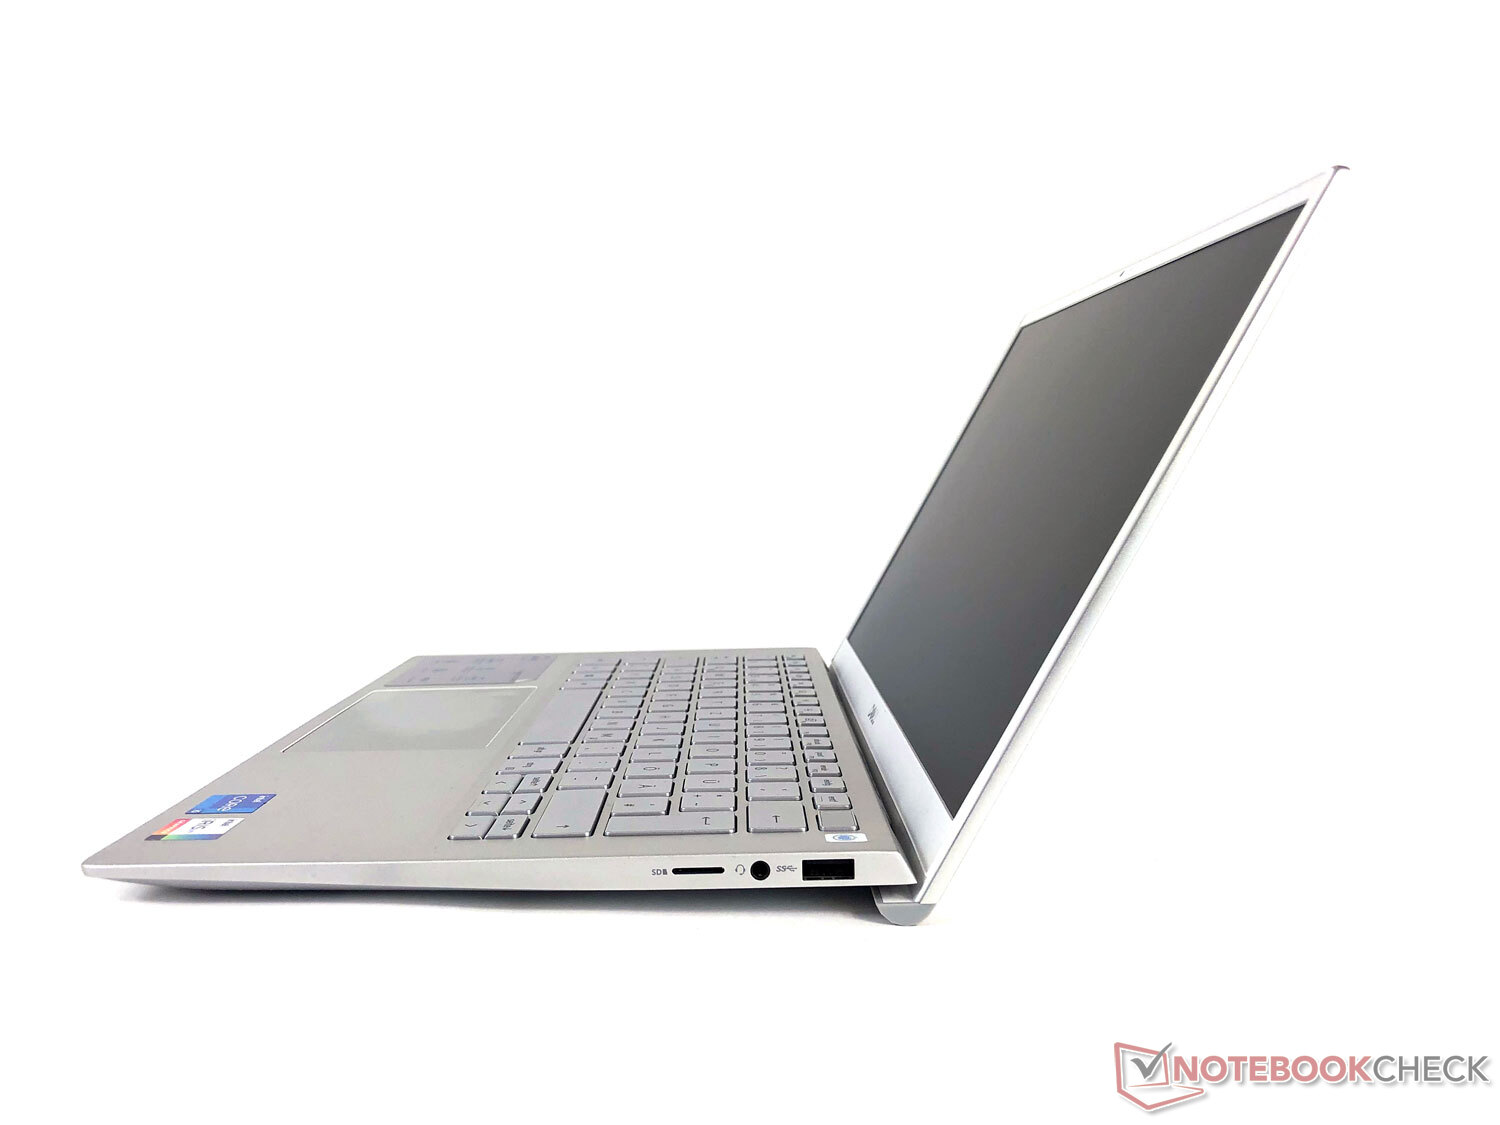 Dell Inspiron 13 5301 in review: Stylish and compact subnotebook 